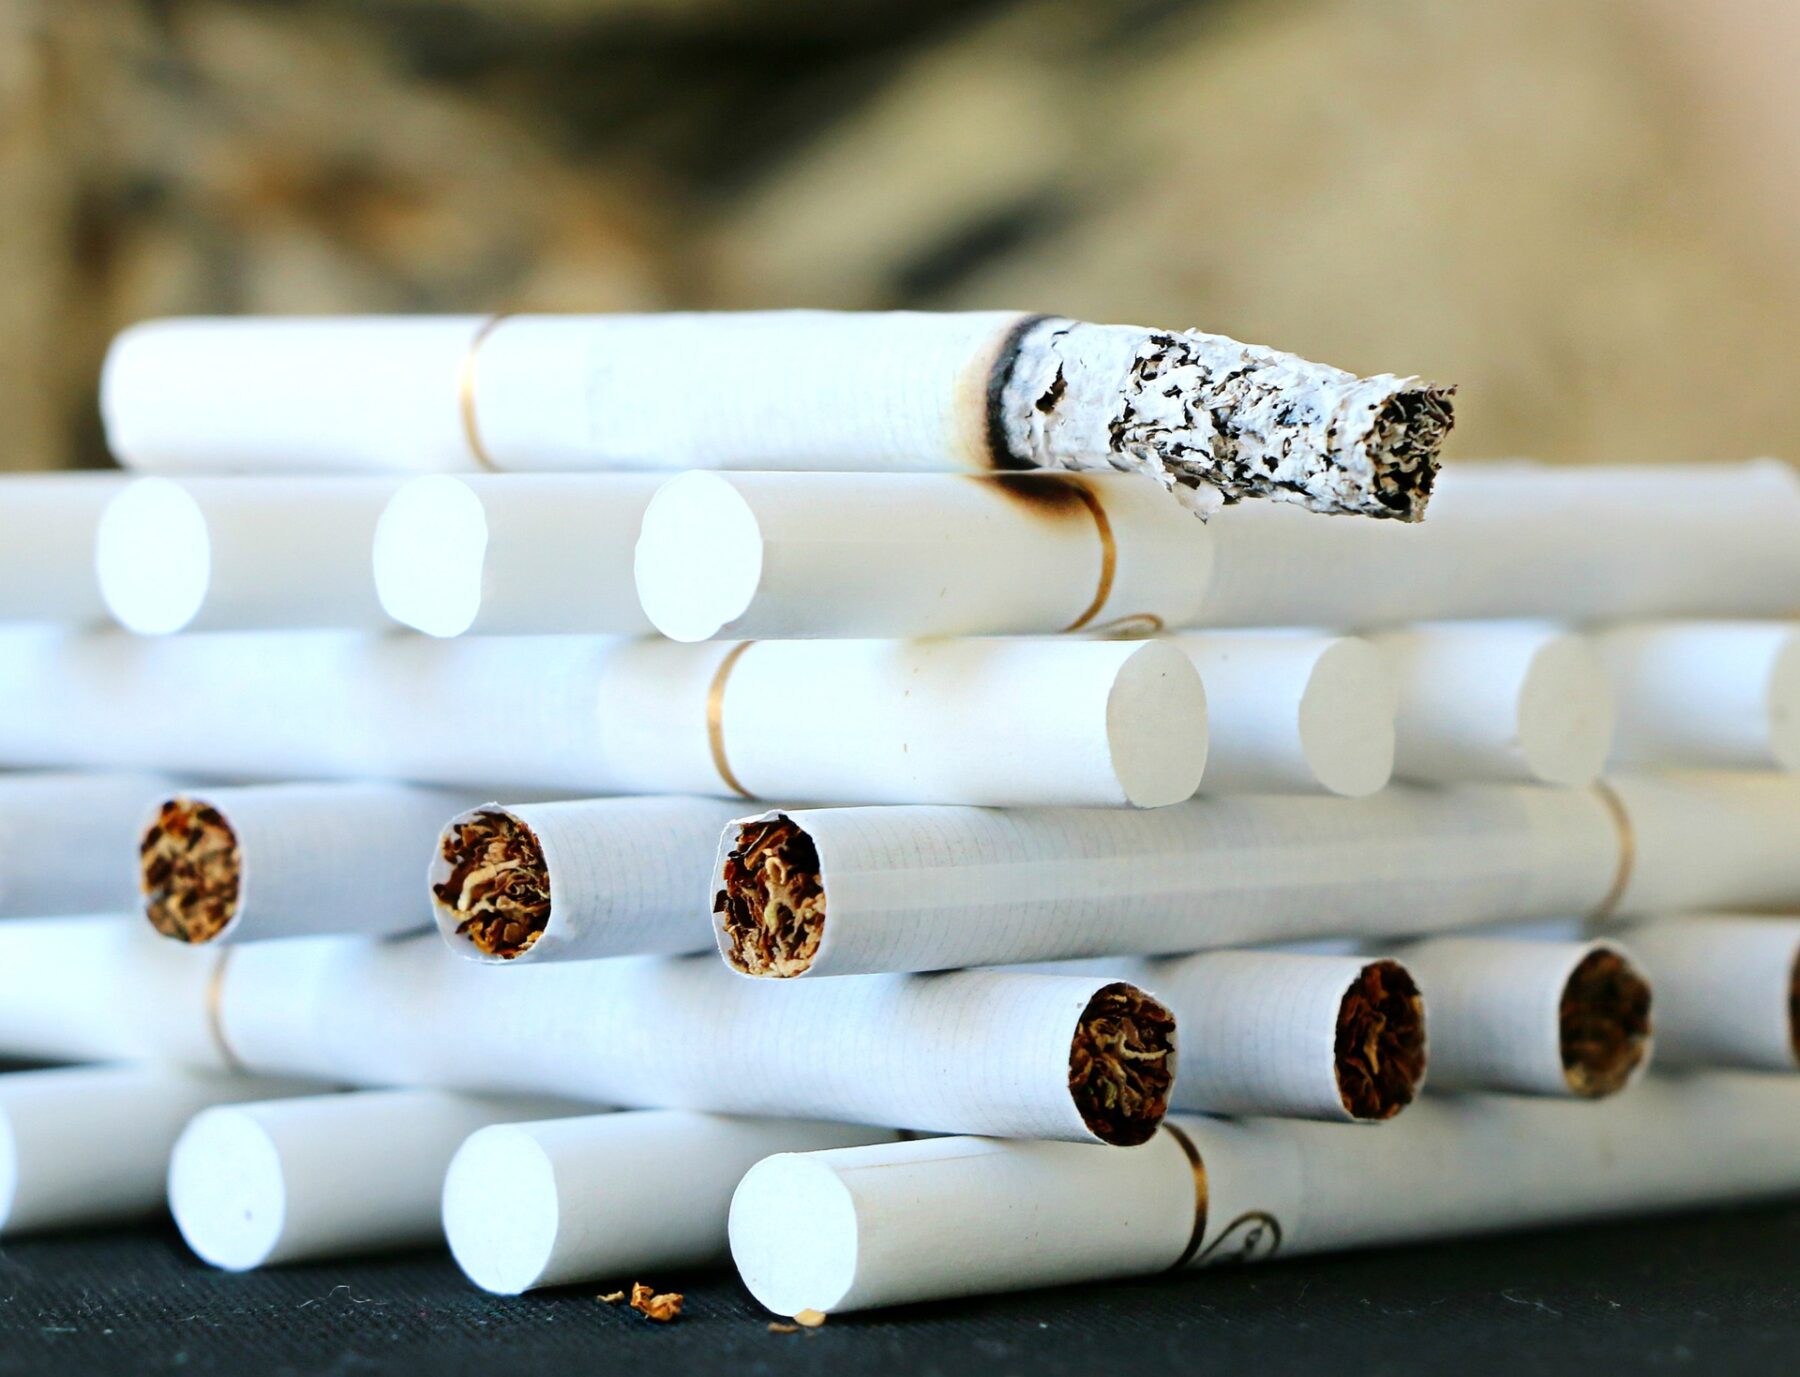 A stack of cigarettes, one of them smoking